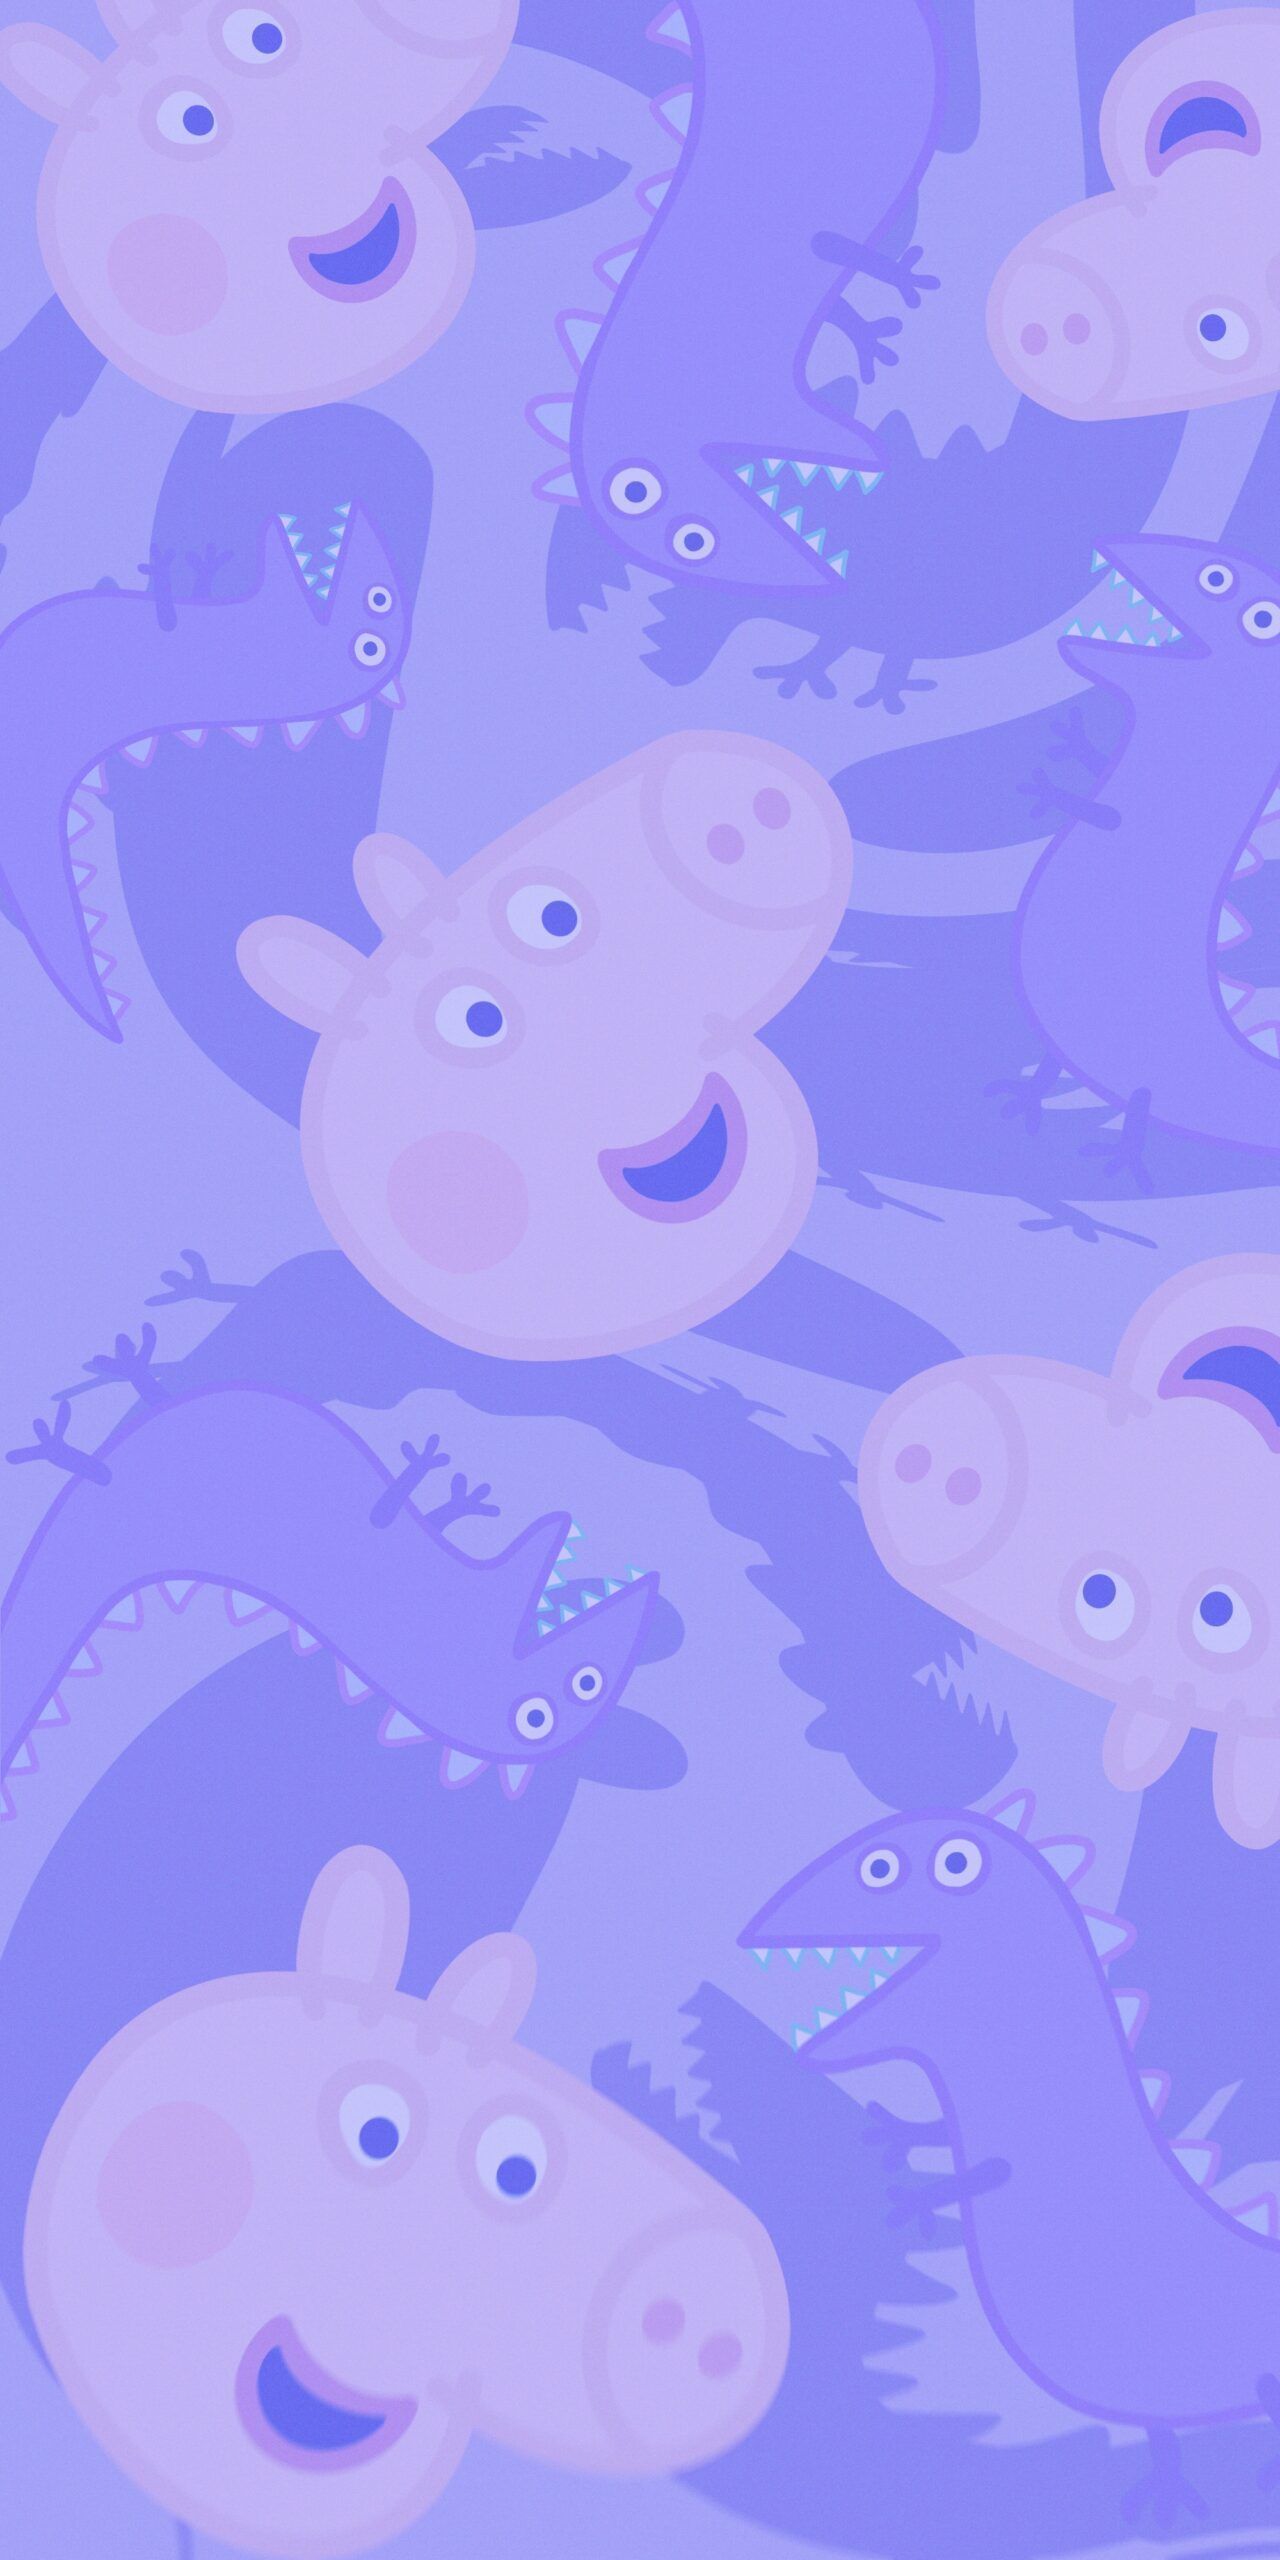 Peppa Pig Wallpaper with George & Dinosaur Background HD